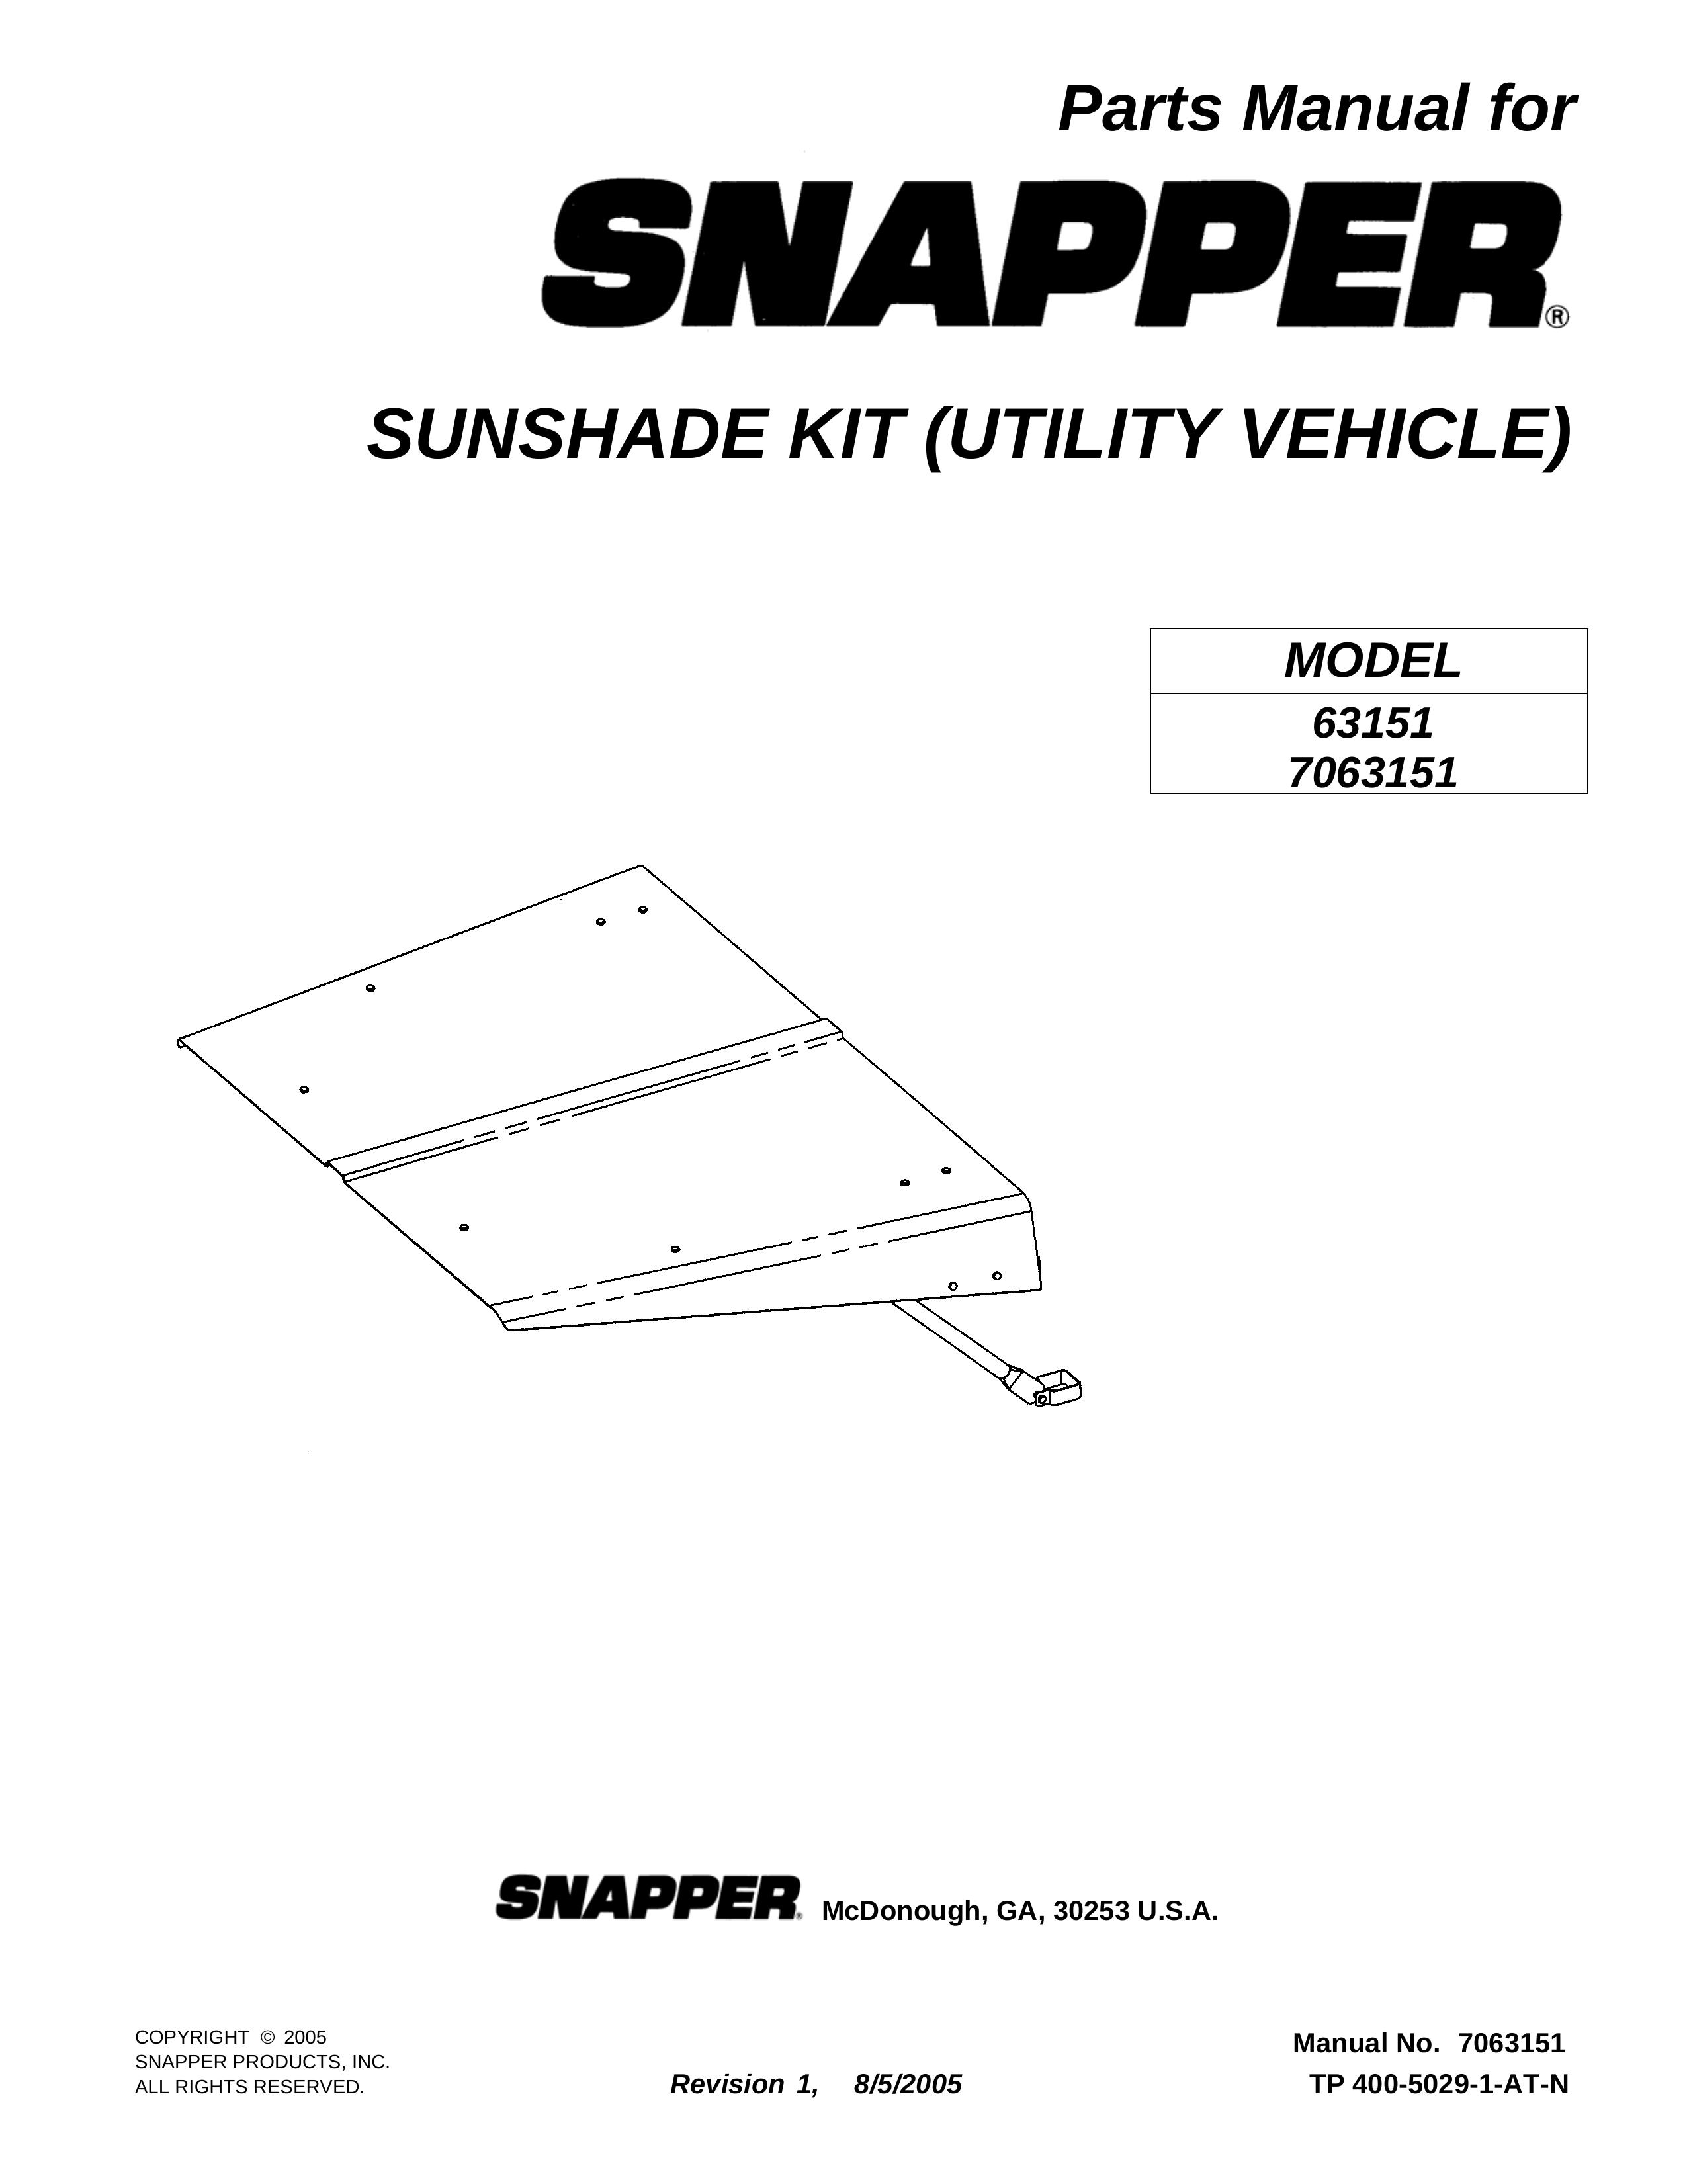 Snapper 63151 Utility Vehicle User Manual